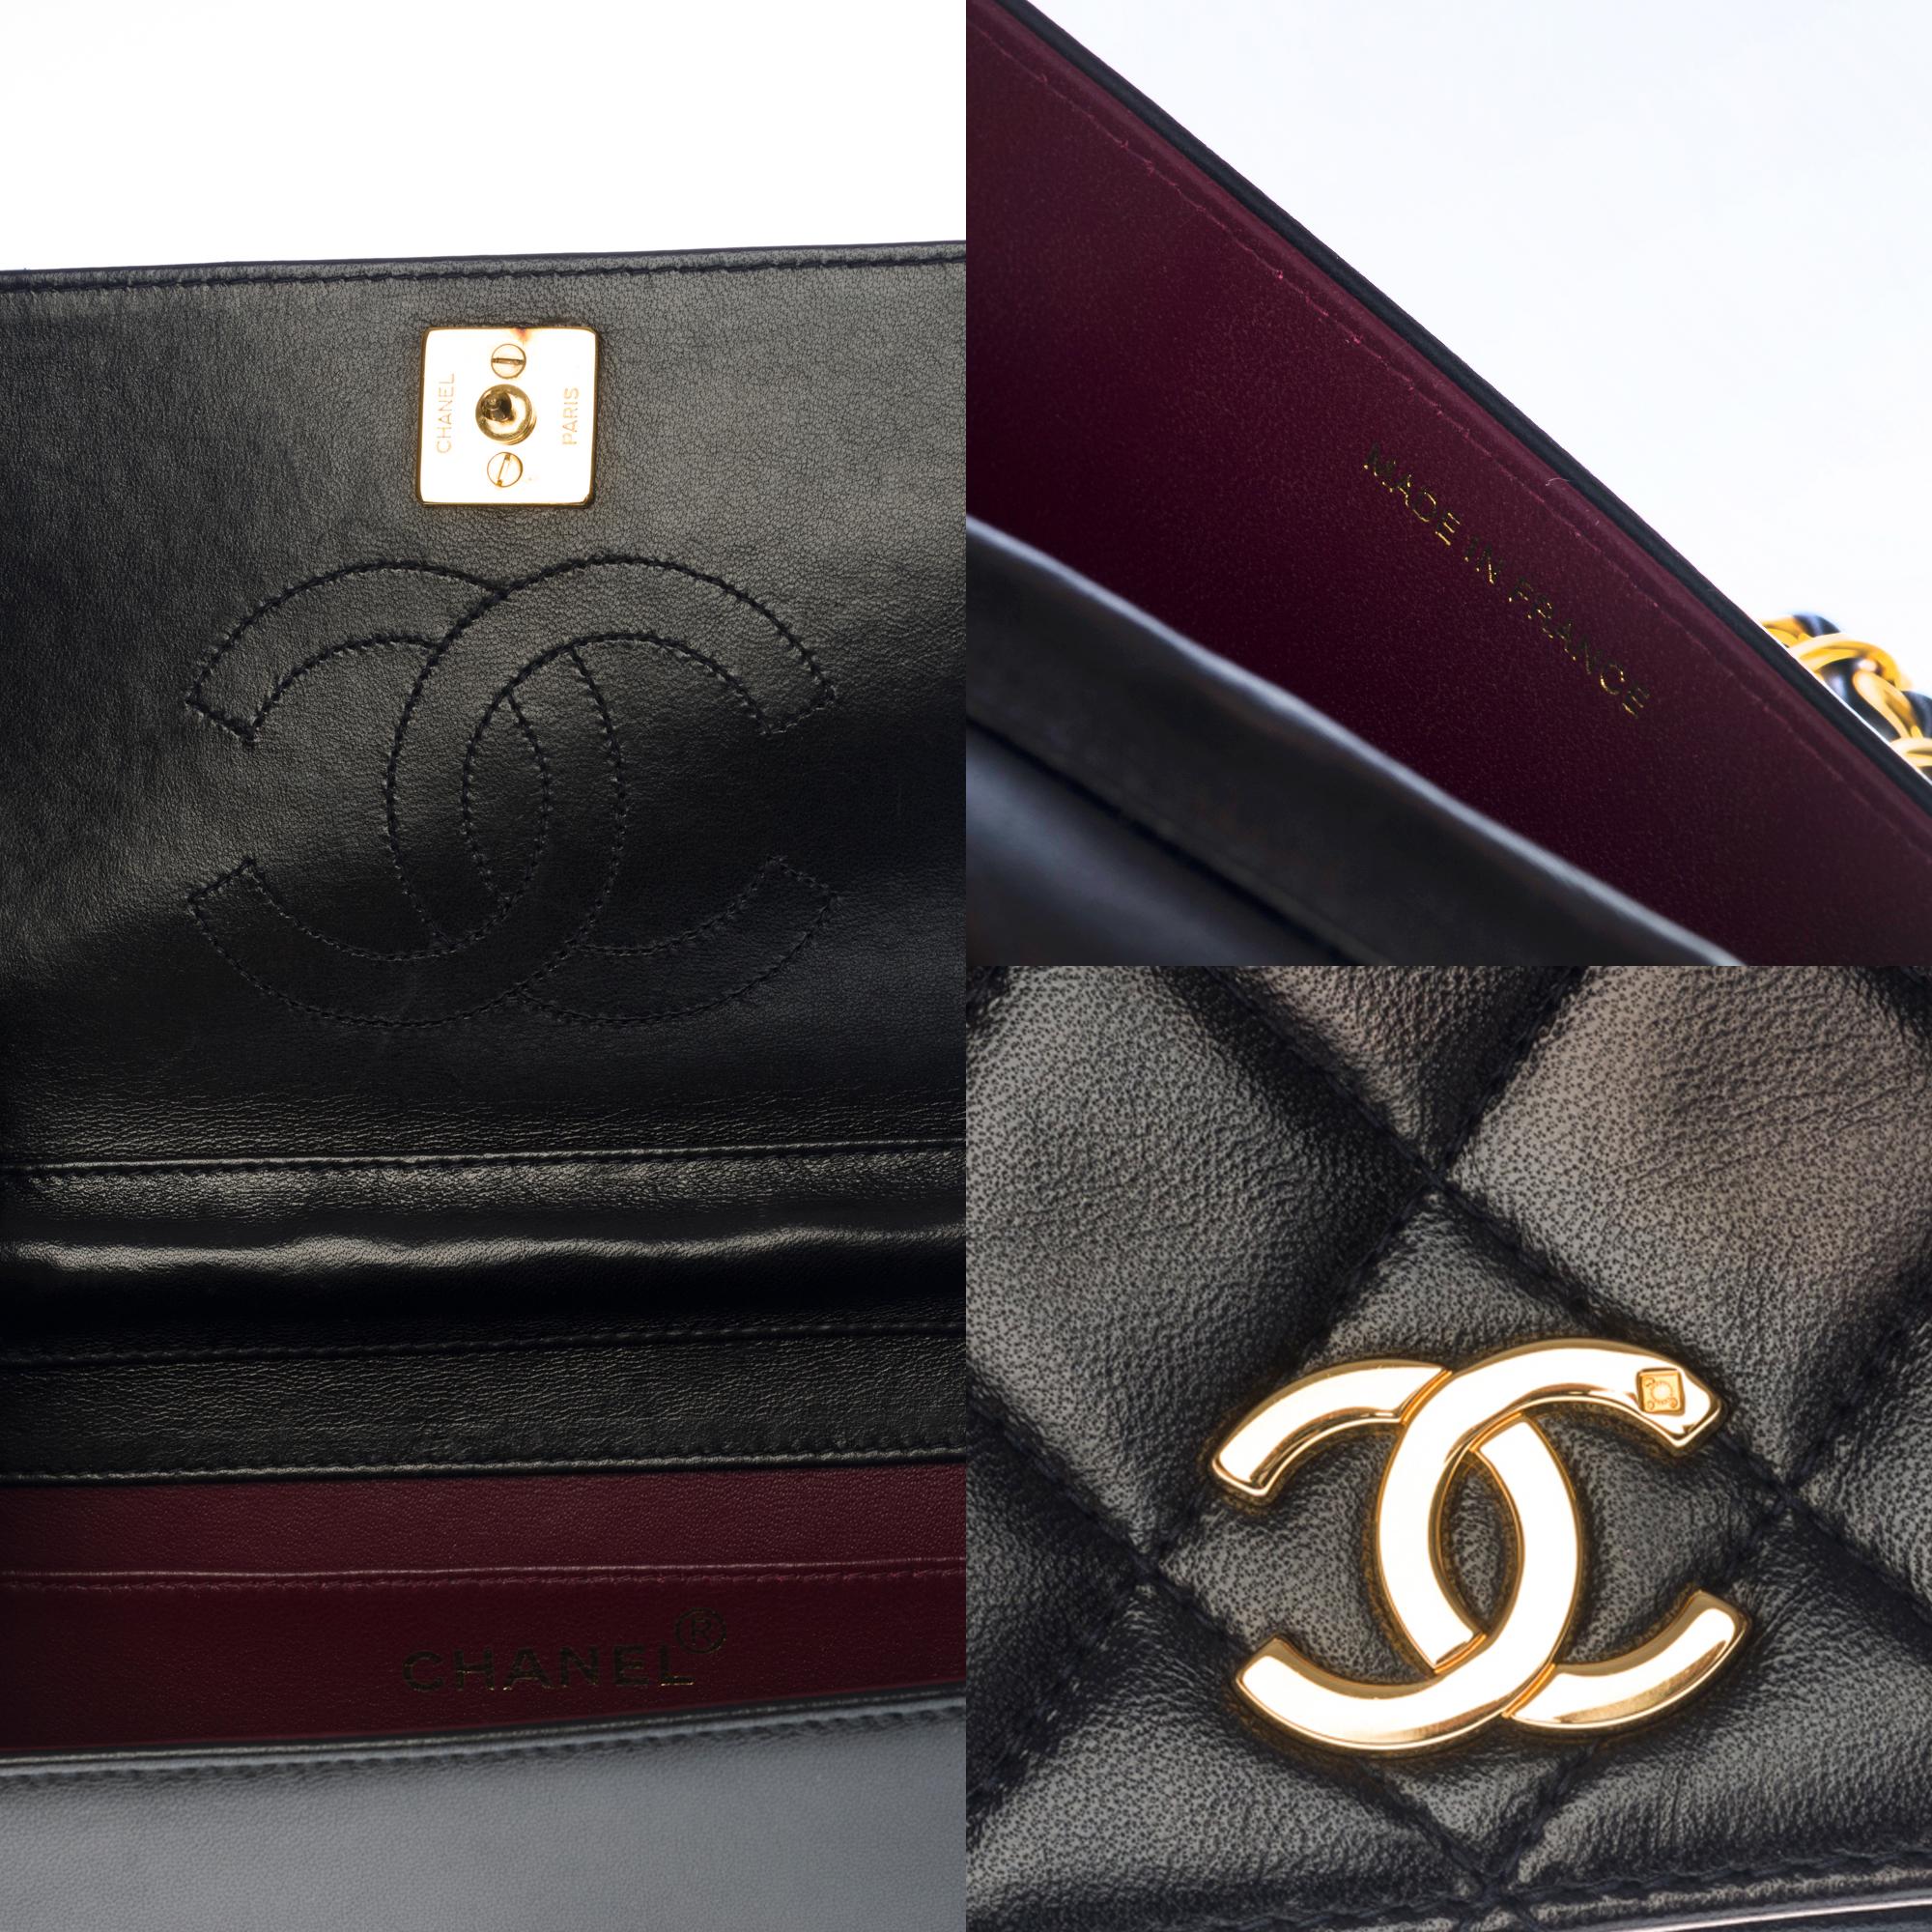 Chanel Classic Mini Full Flap shoulder bag in black quilted lambskin leather, GHW 1